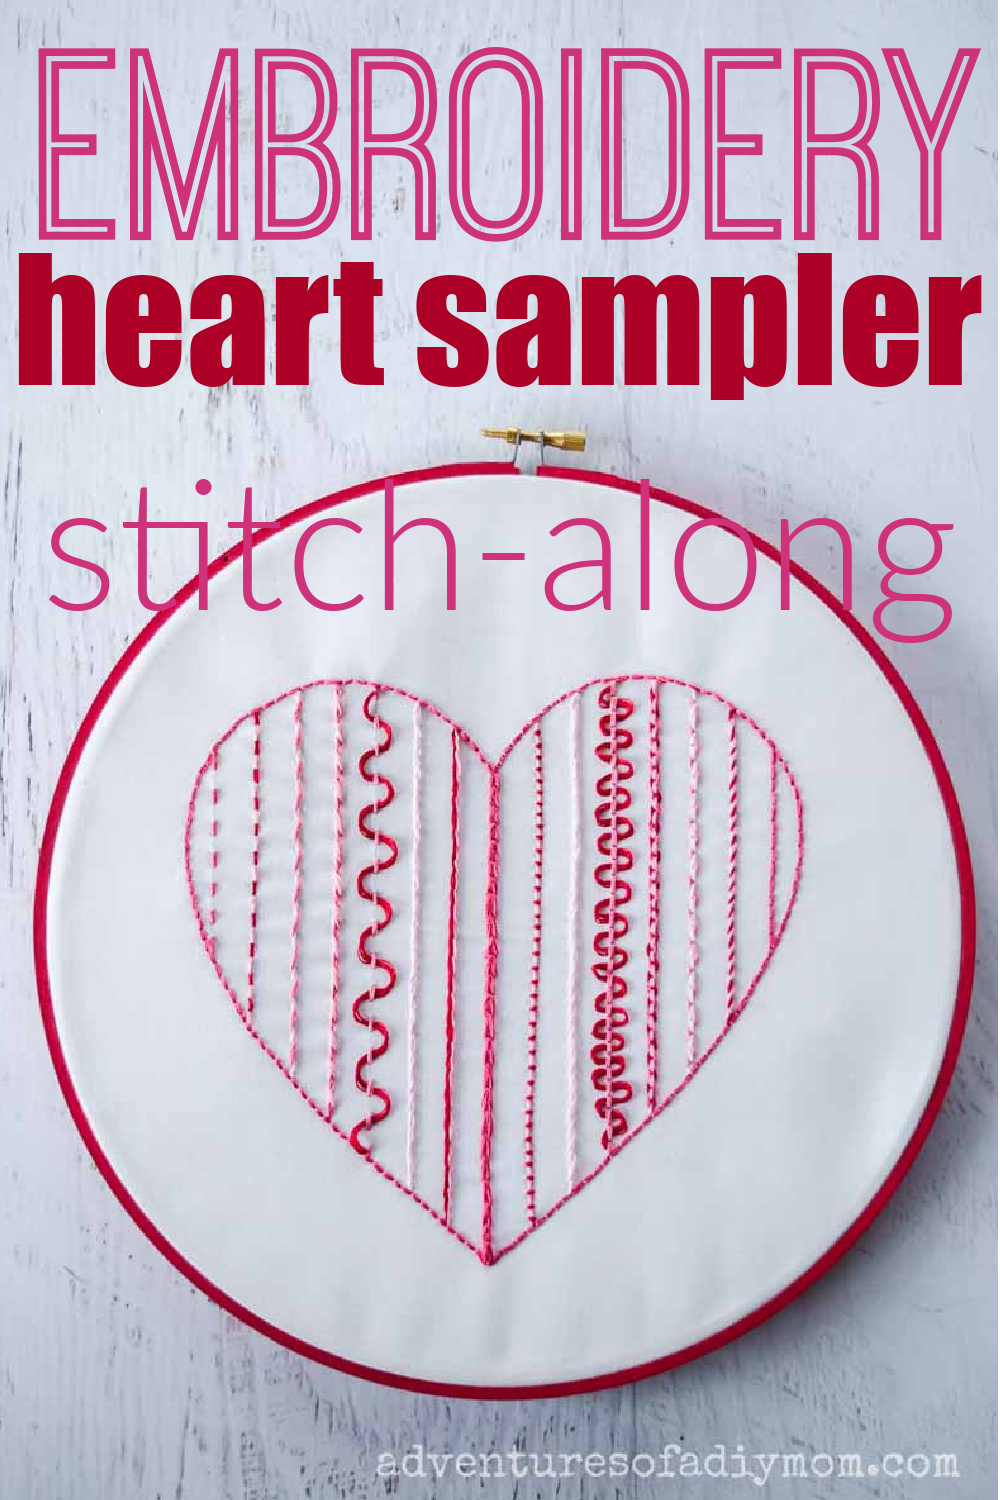 Heart Sampler Embroidery Stitch Along - Adventures of a DIY Mom